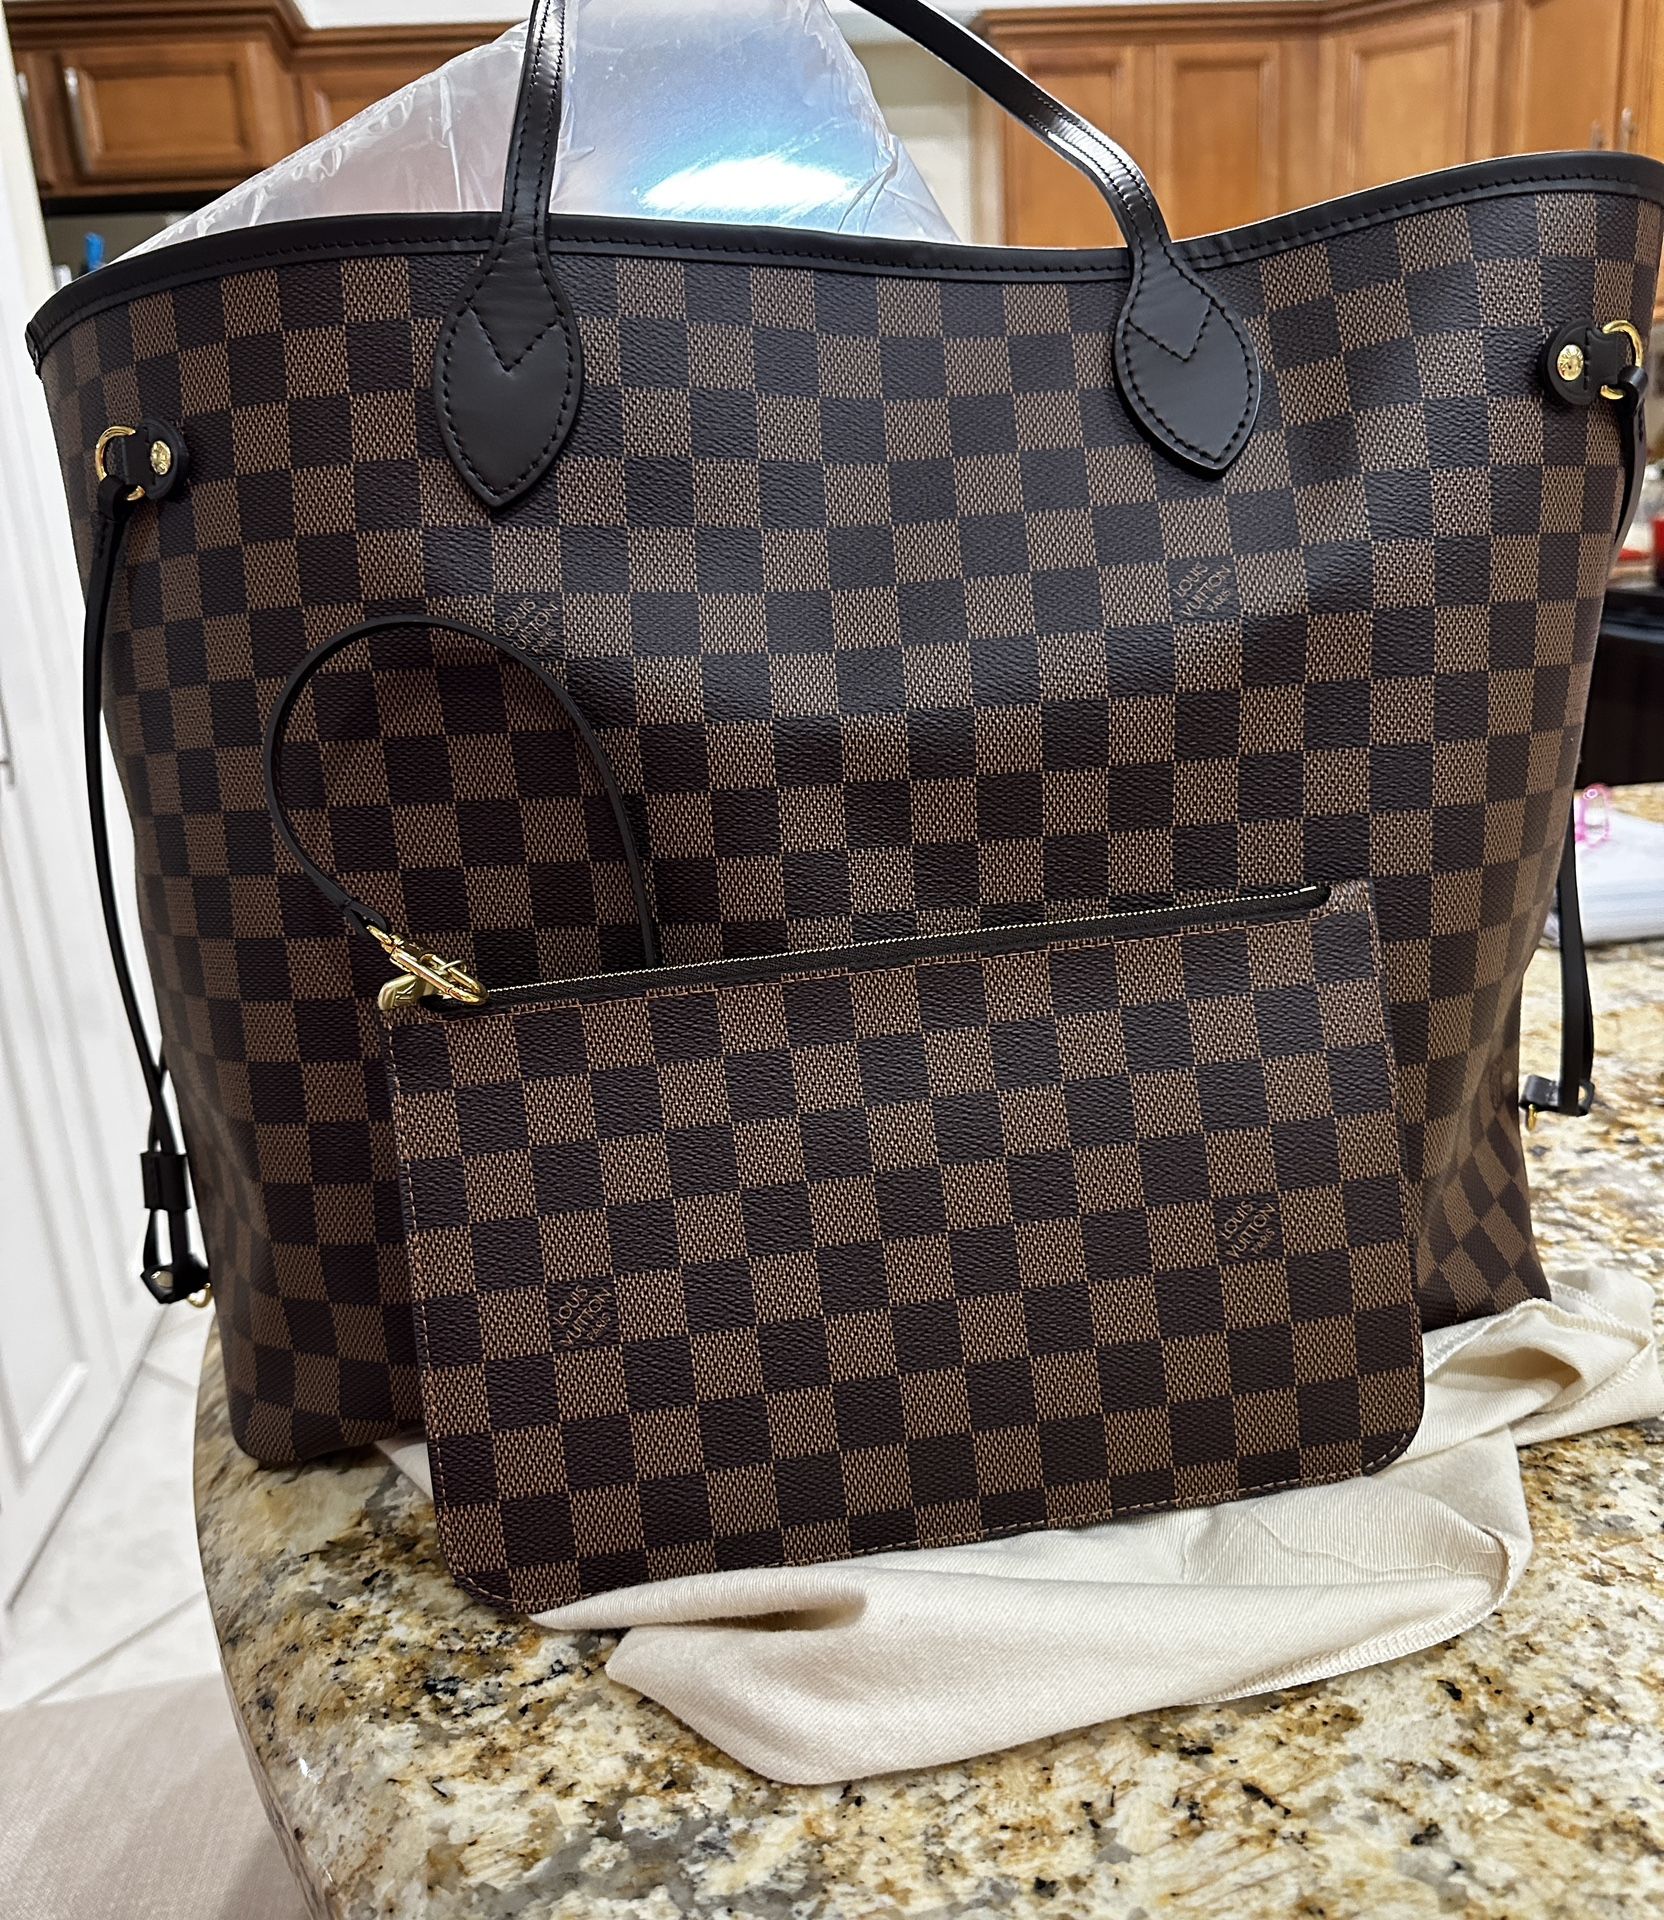 Authentic Neverfull Gm Louis Vuitton 